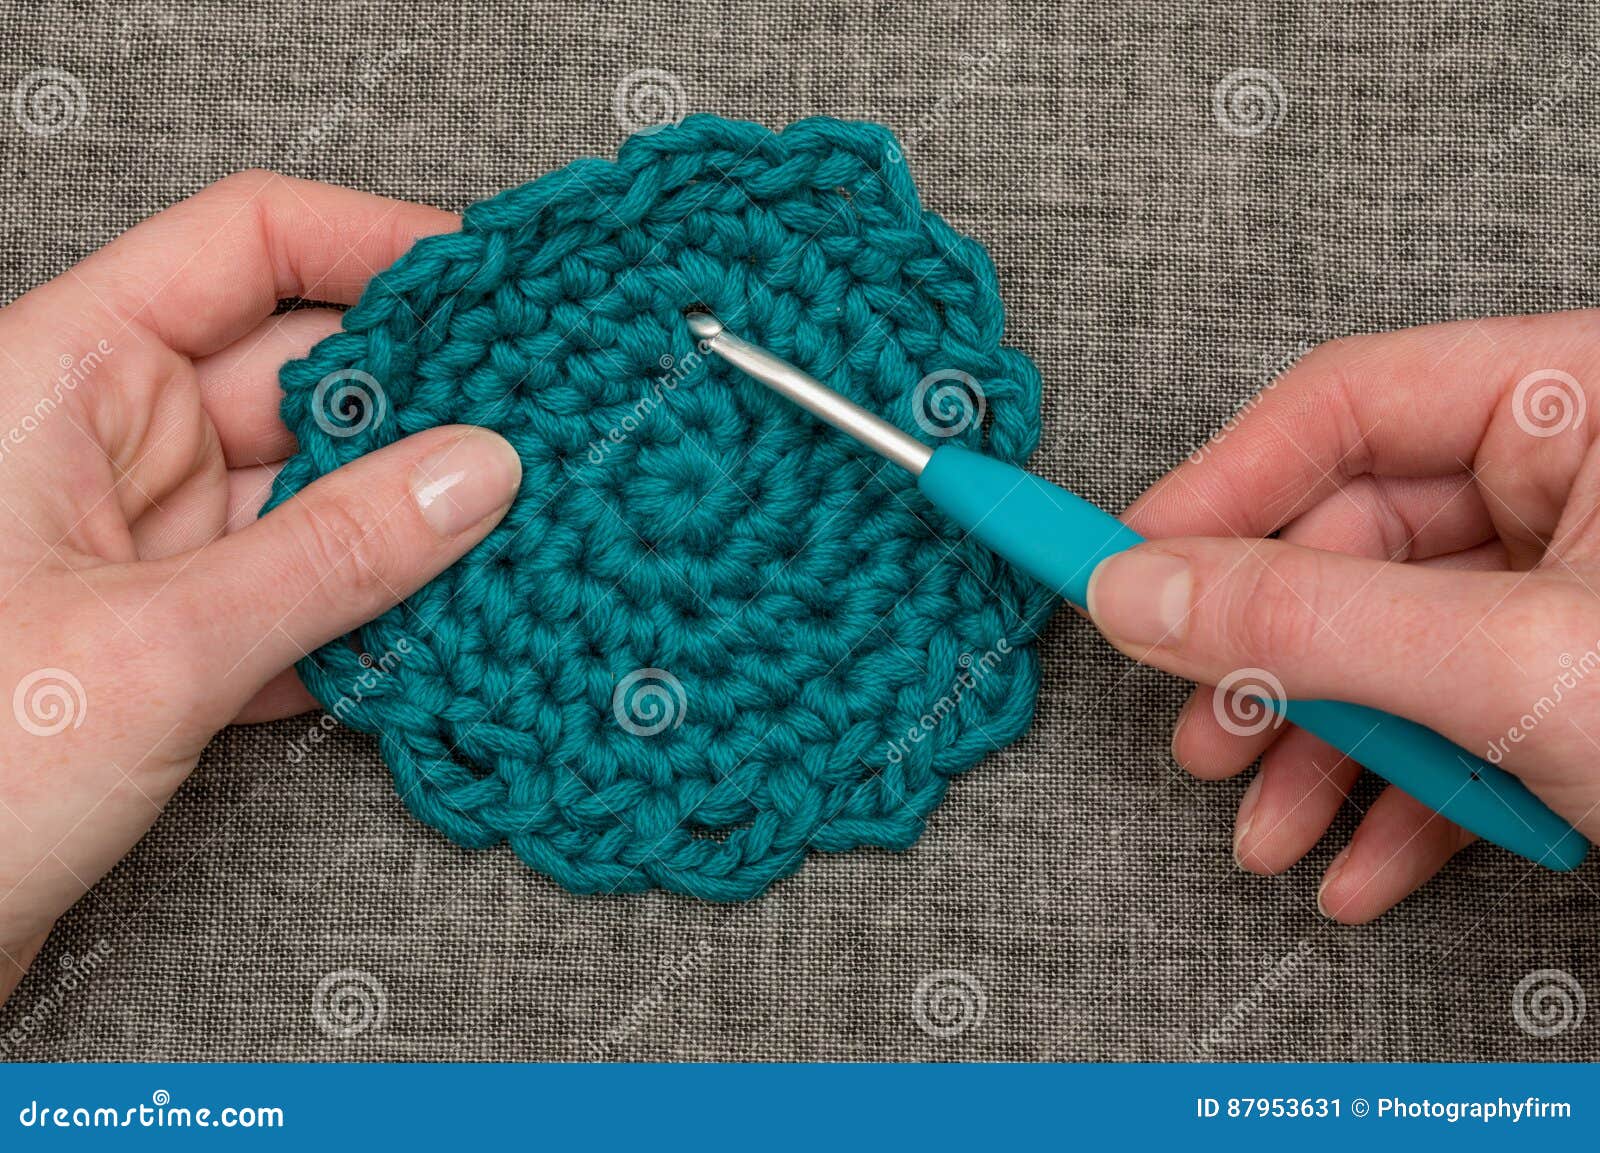 Knitting Hook Piercing a Round Teal Crocheted Coaster Stock Image - Image  of close, knitting: 87953631